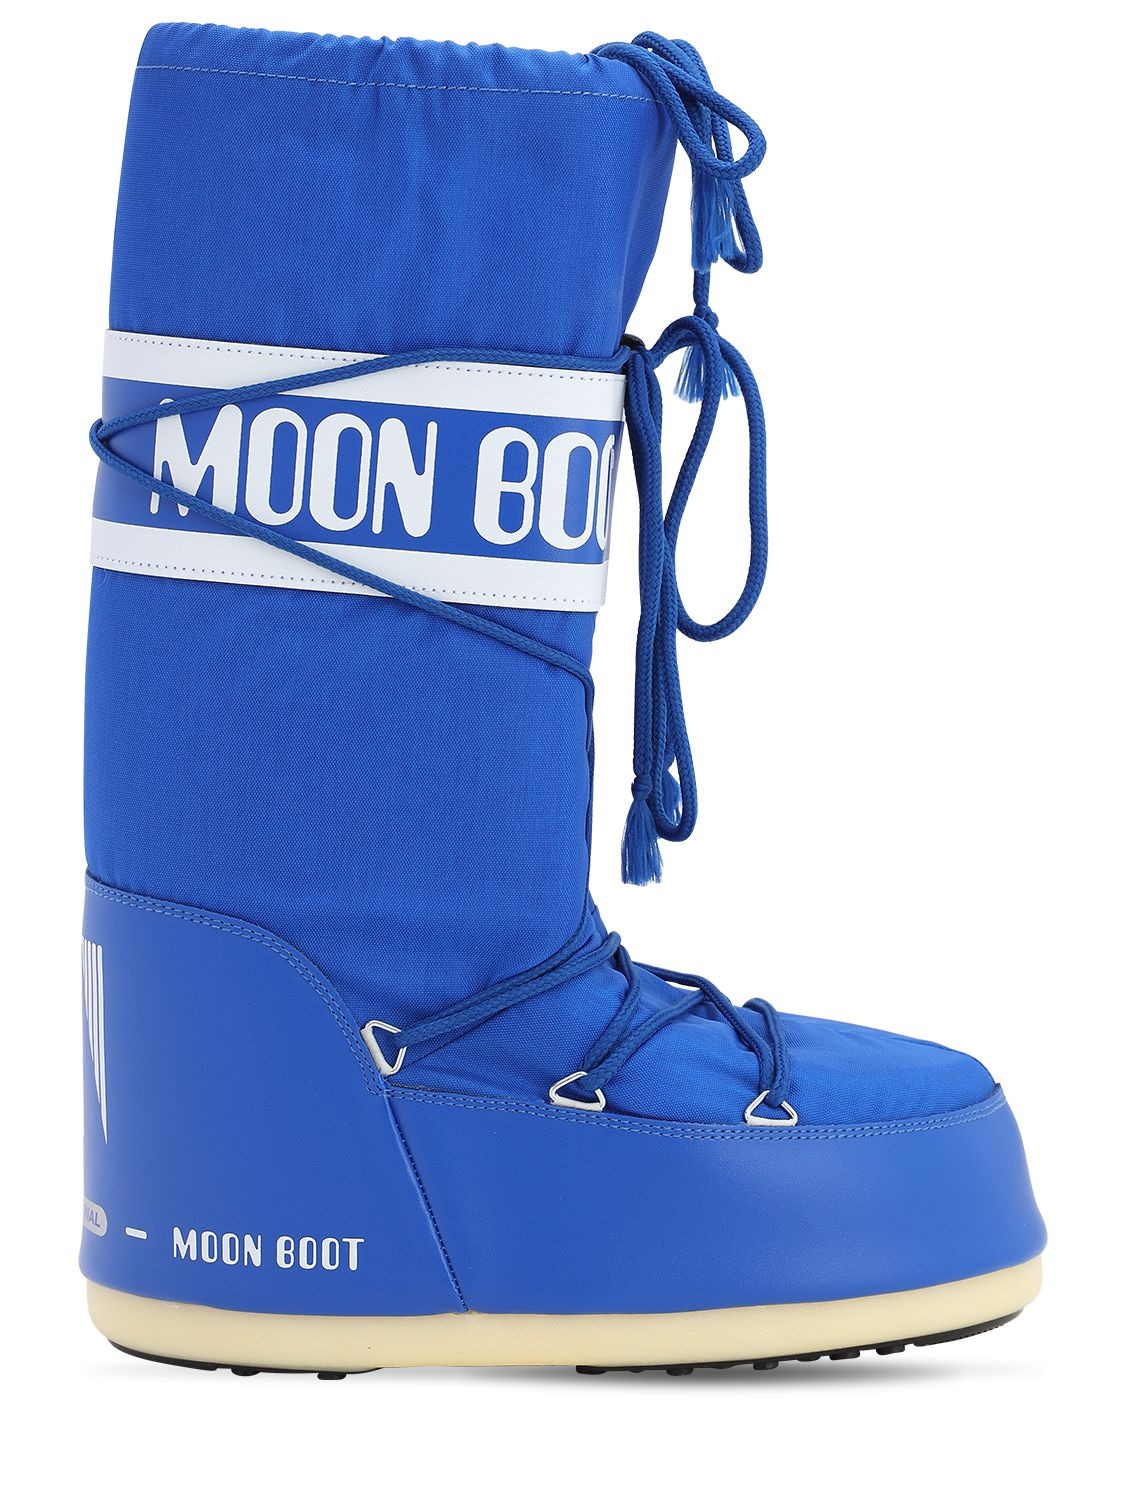 Moon Boot Classic Nylon Waterproof Snow Boots In Electric Blue